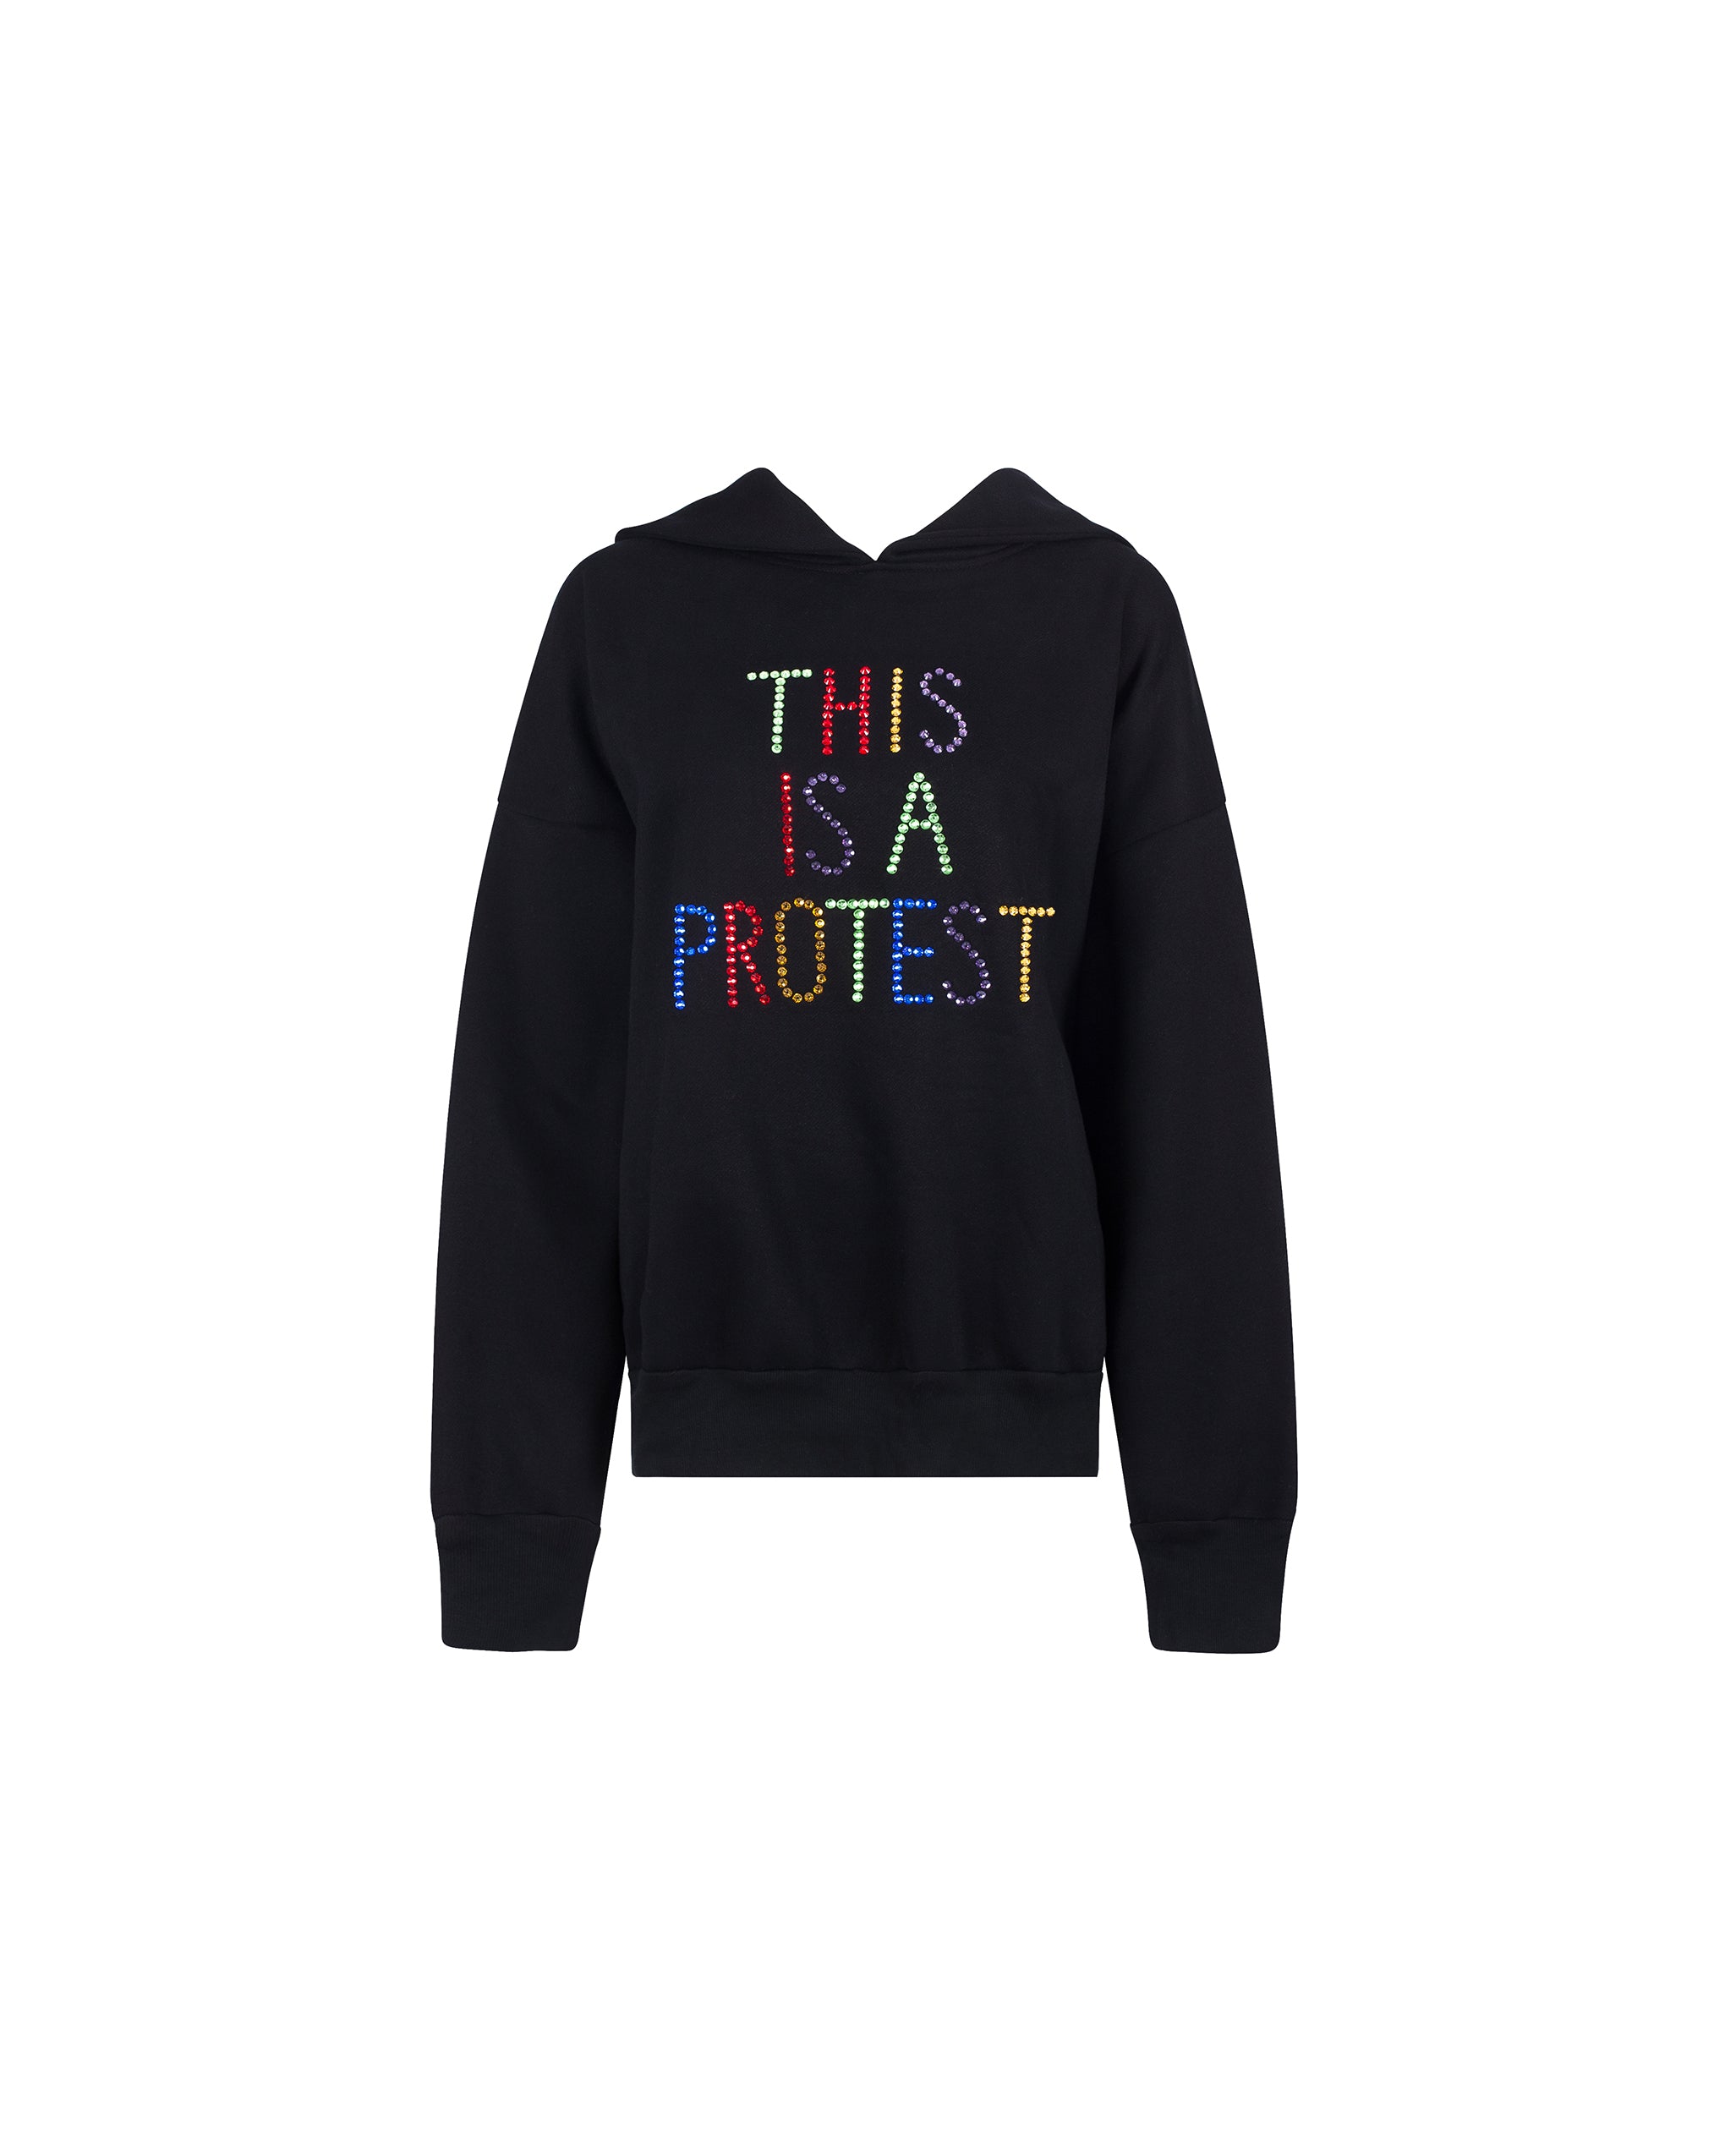 bluebella bb x ashish this is a protest hoodie